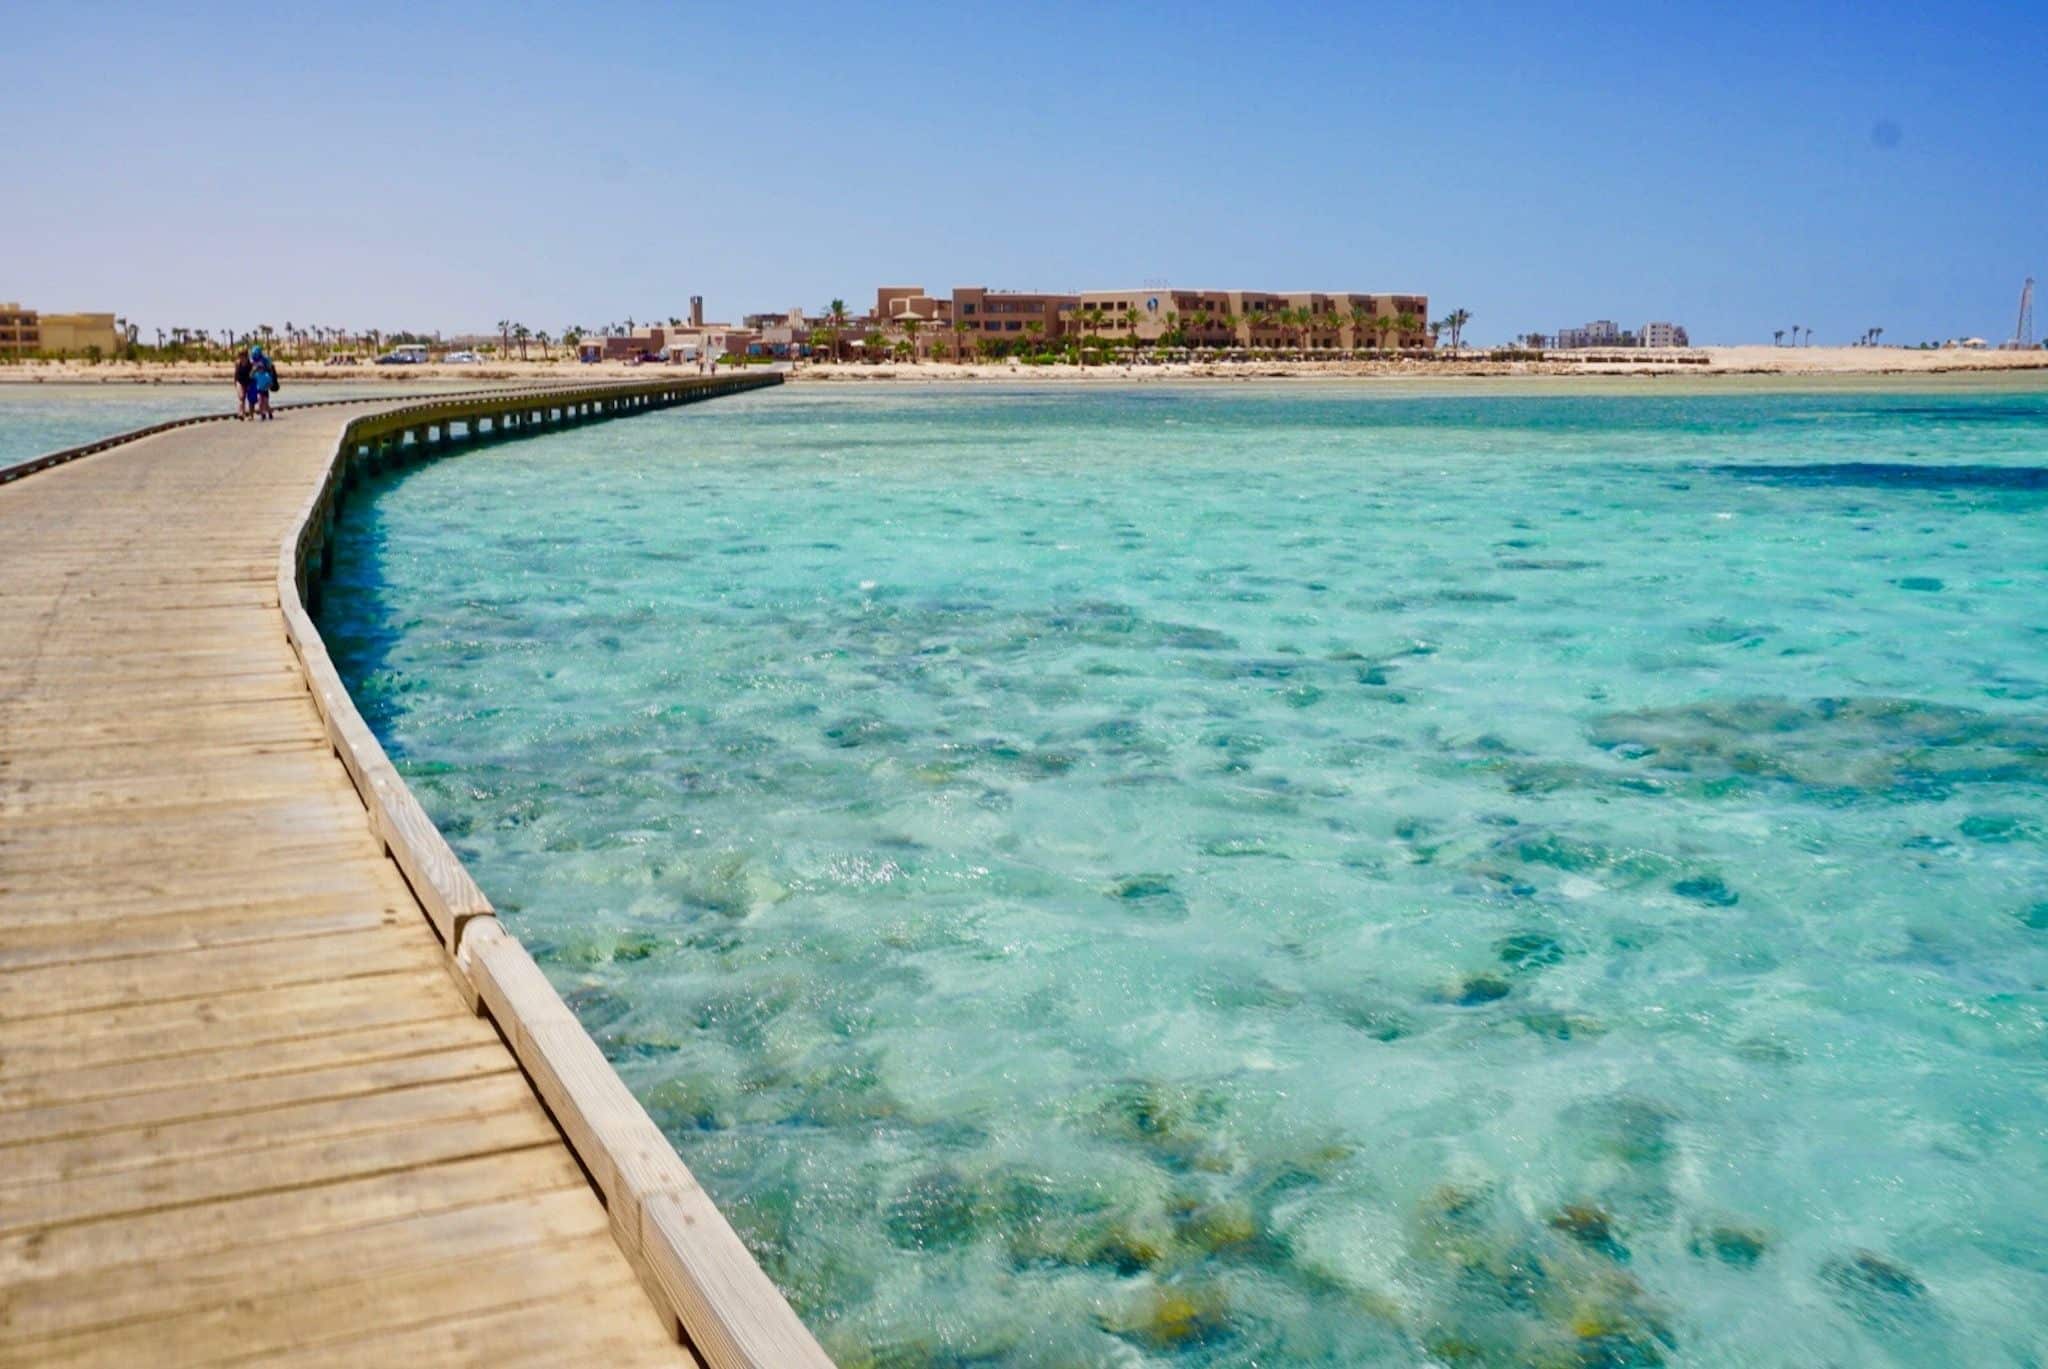 The iconic jetty of The Breakers Hotel is one of the most beautiful sights in Soma Bay - and leads directly to the magnificent Soma Bay house reef, one of the most beautiful in the Red Sea. Photo: Sascha Tegtmeyer